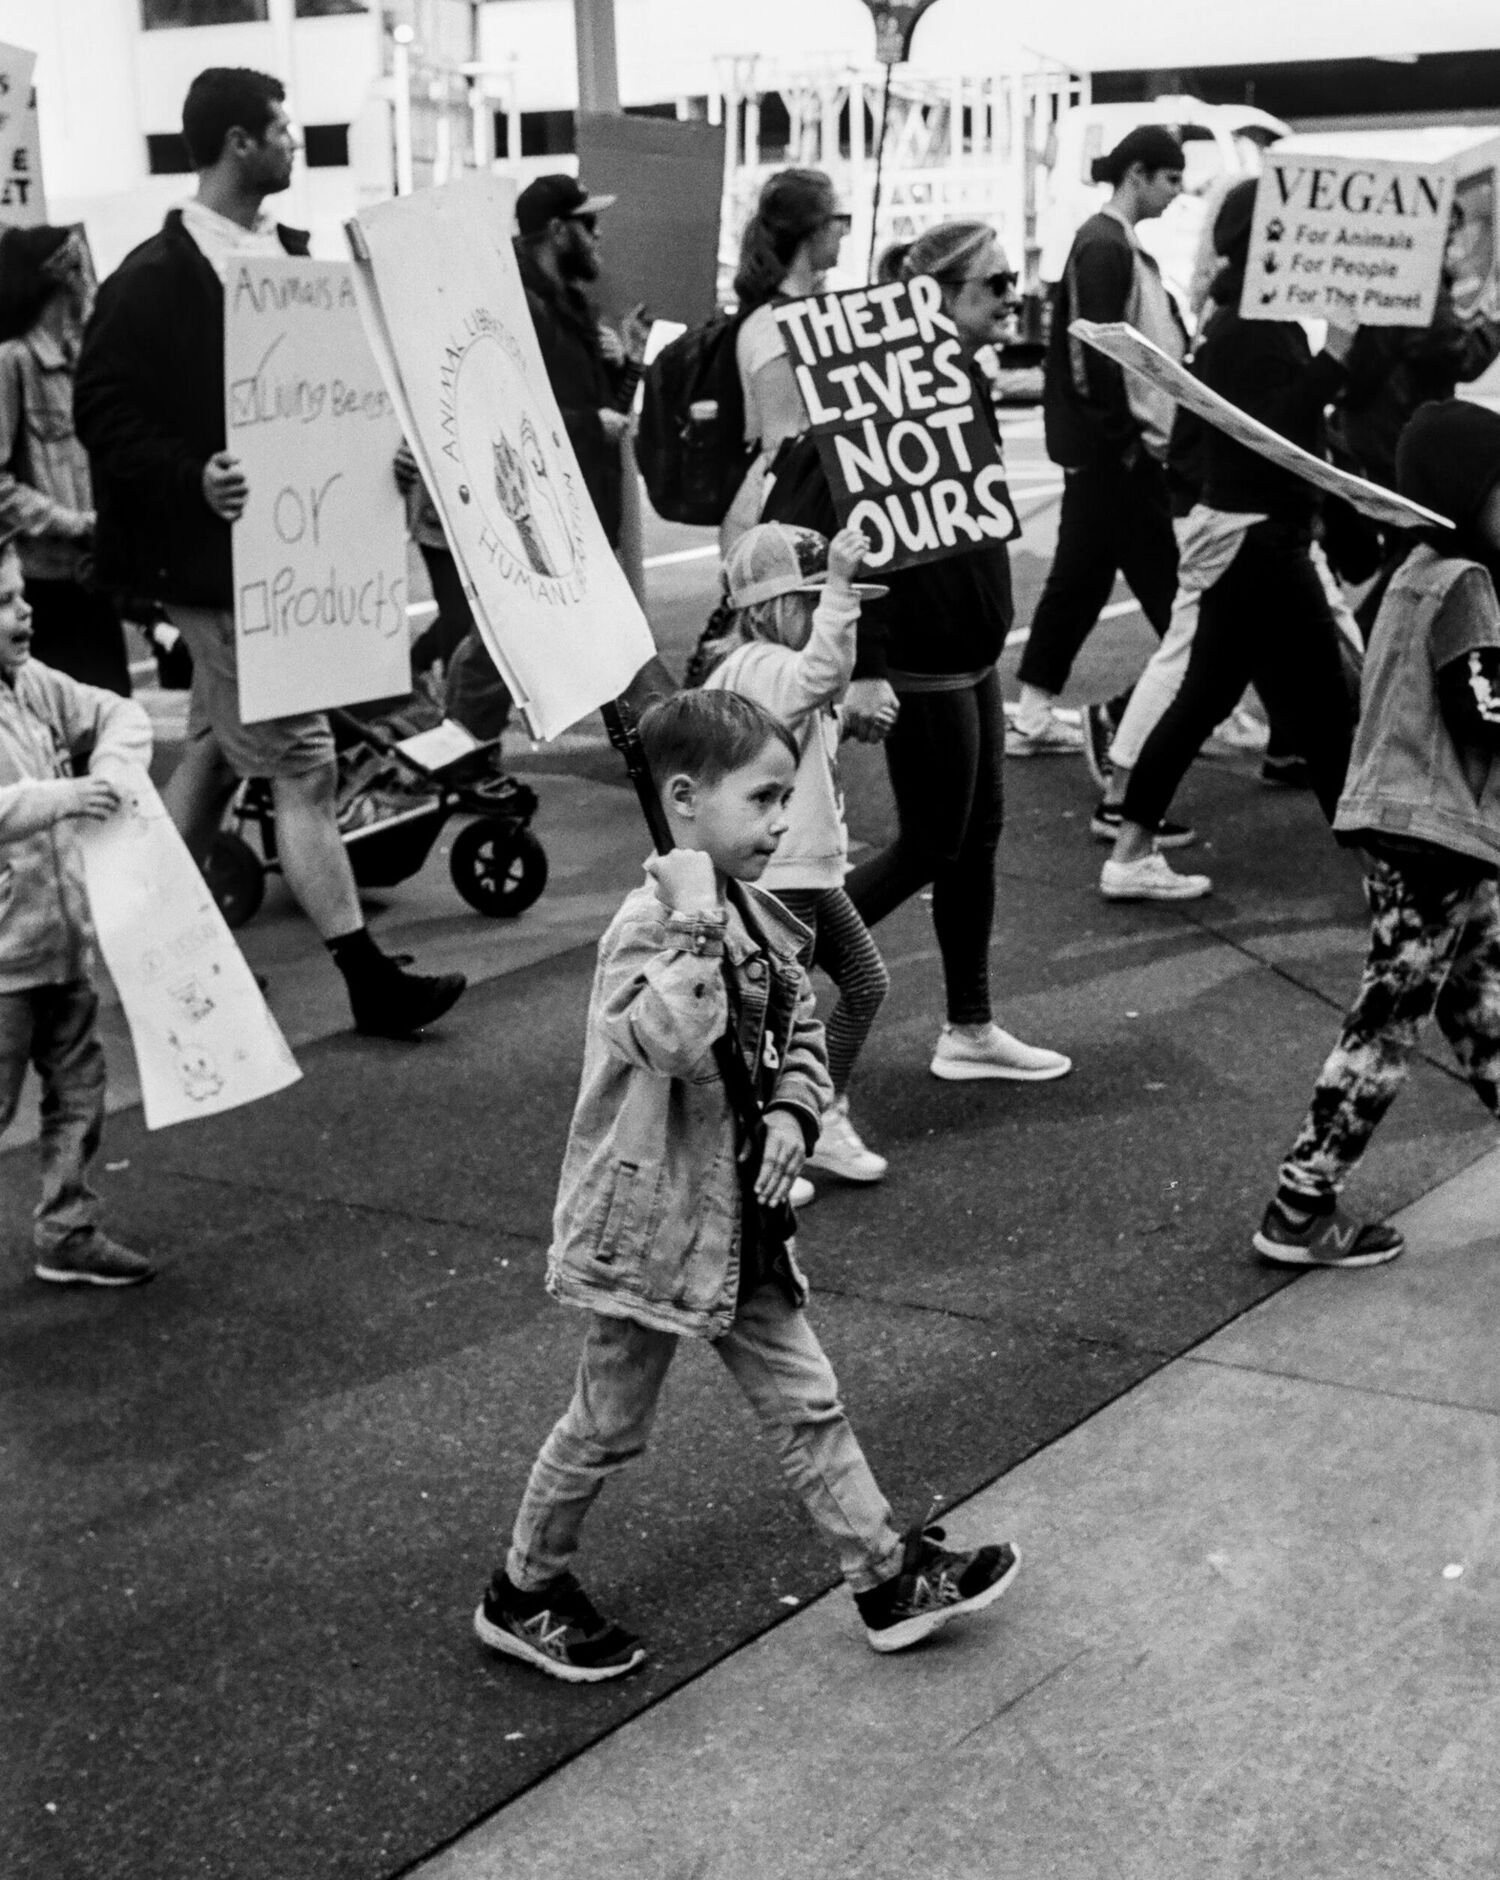 A ten year old boy marches in a crowd holding an Animal Liberation sign